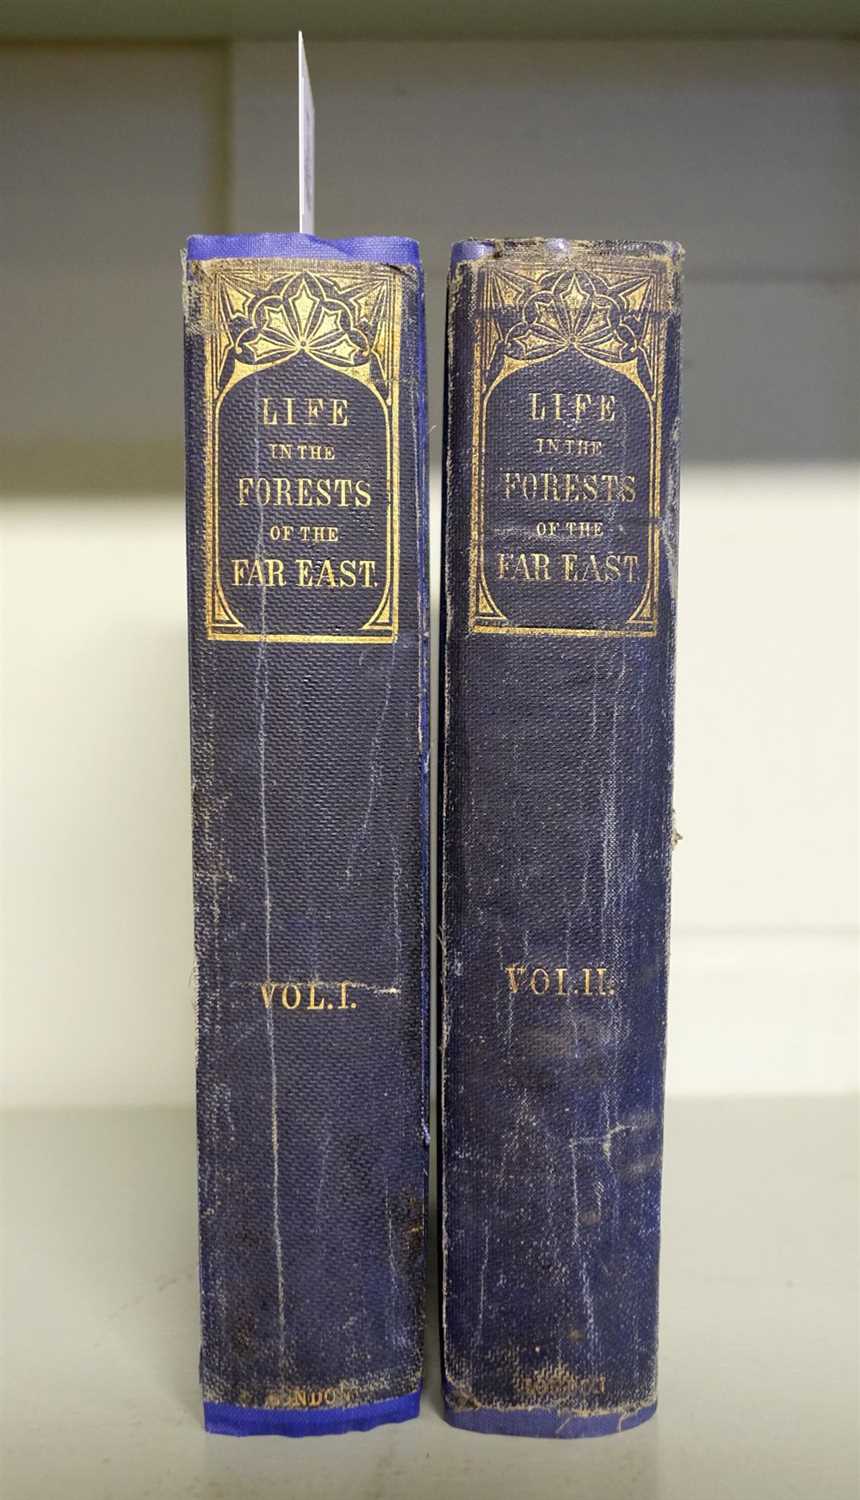 Lot 63 - St. John (Spenser). Life in the Forests of the Far East, 1862